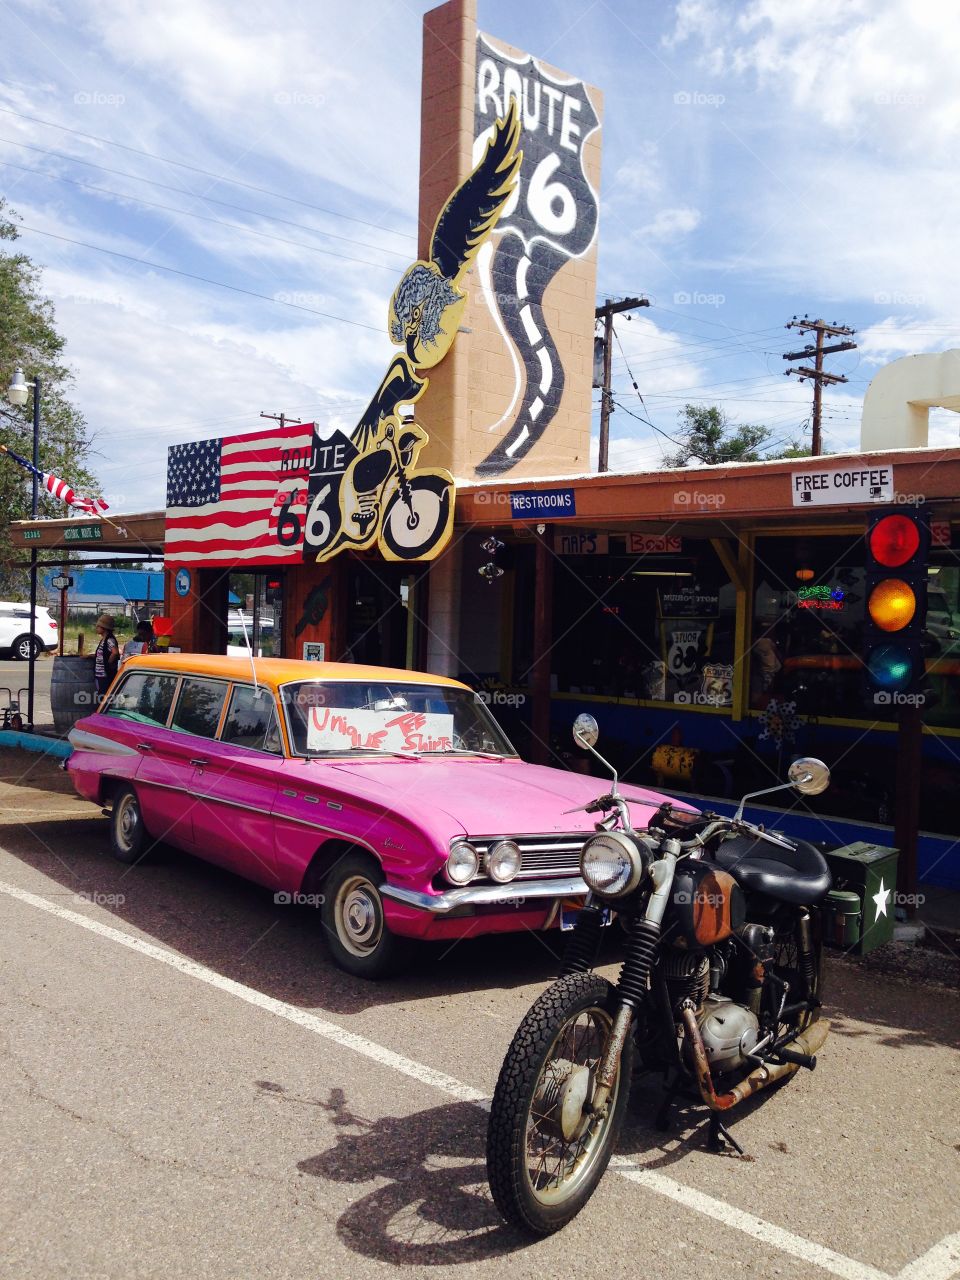 Colorful Vehicles stand in front of the store.
On the route 66,Arizona